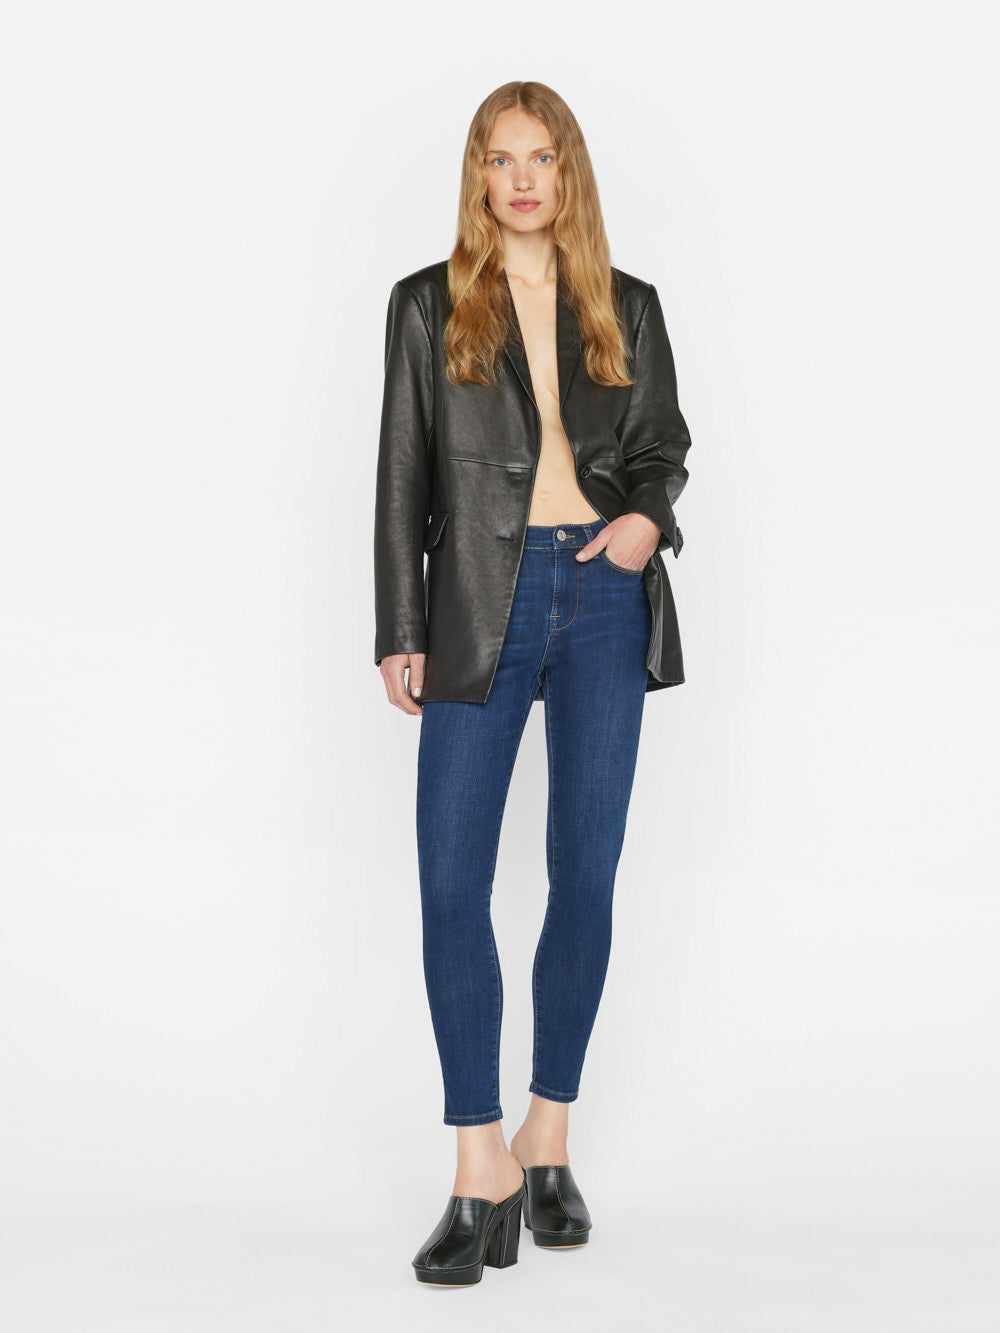 person wears a black leather blazer styled with clean indigo denim skinny jeans by frame; showing front view